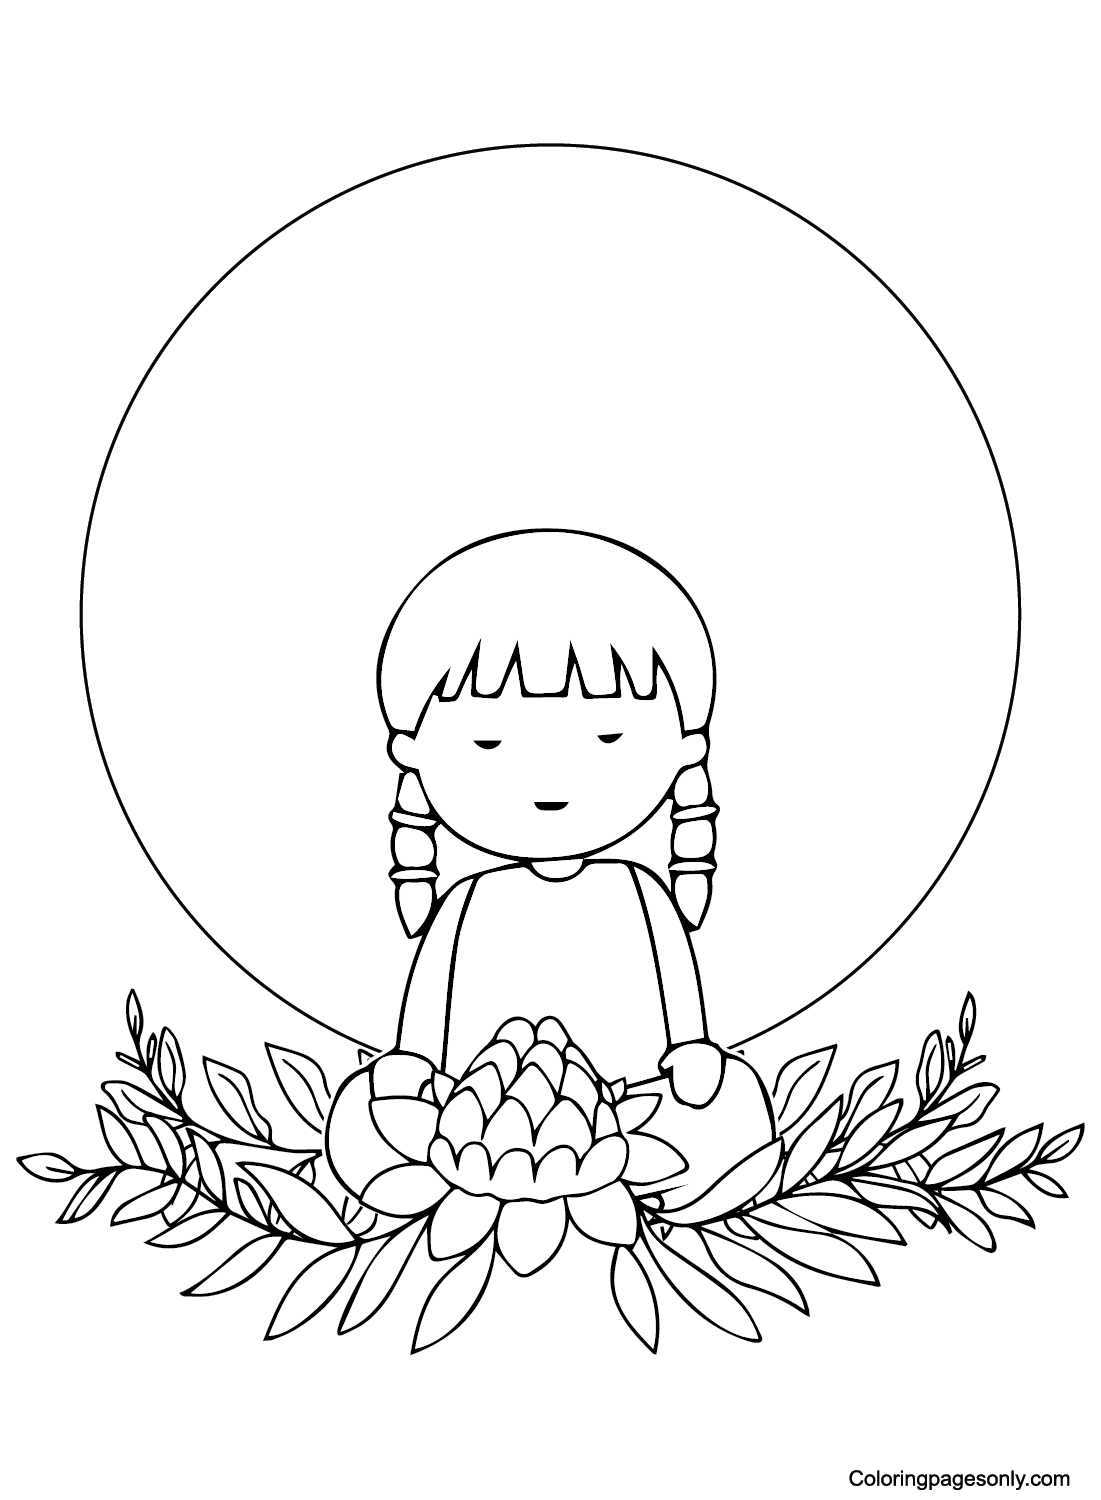 Free Mindfulness Pictures Coloring Pages